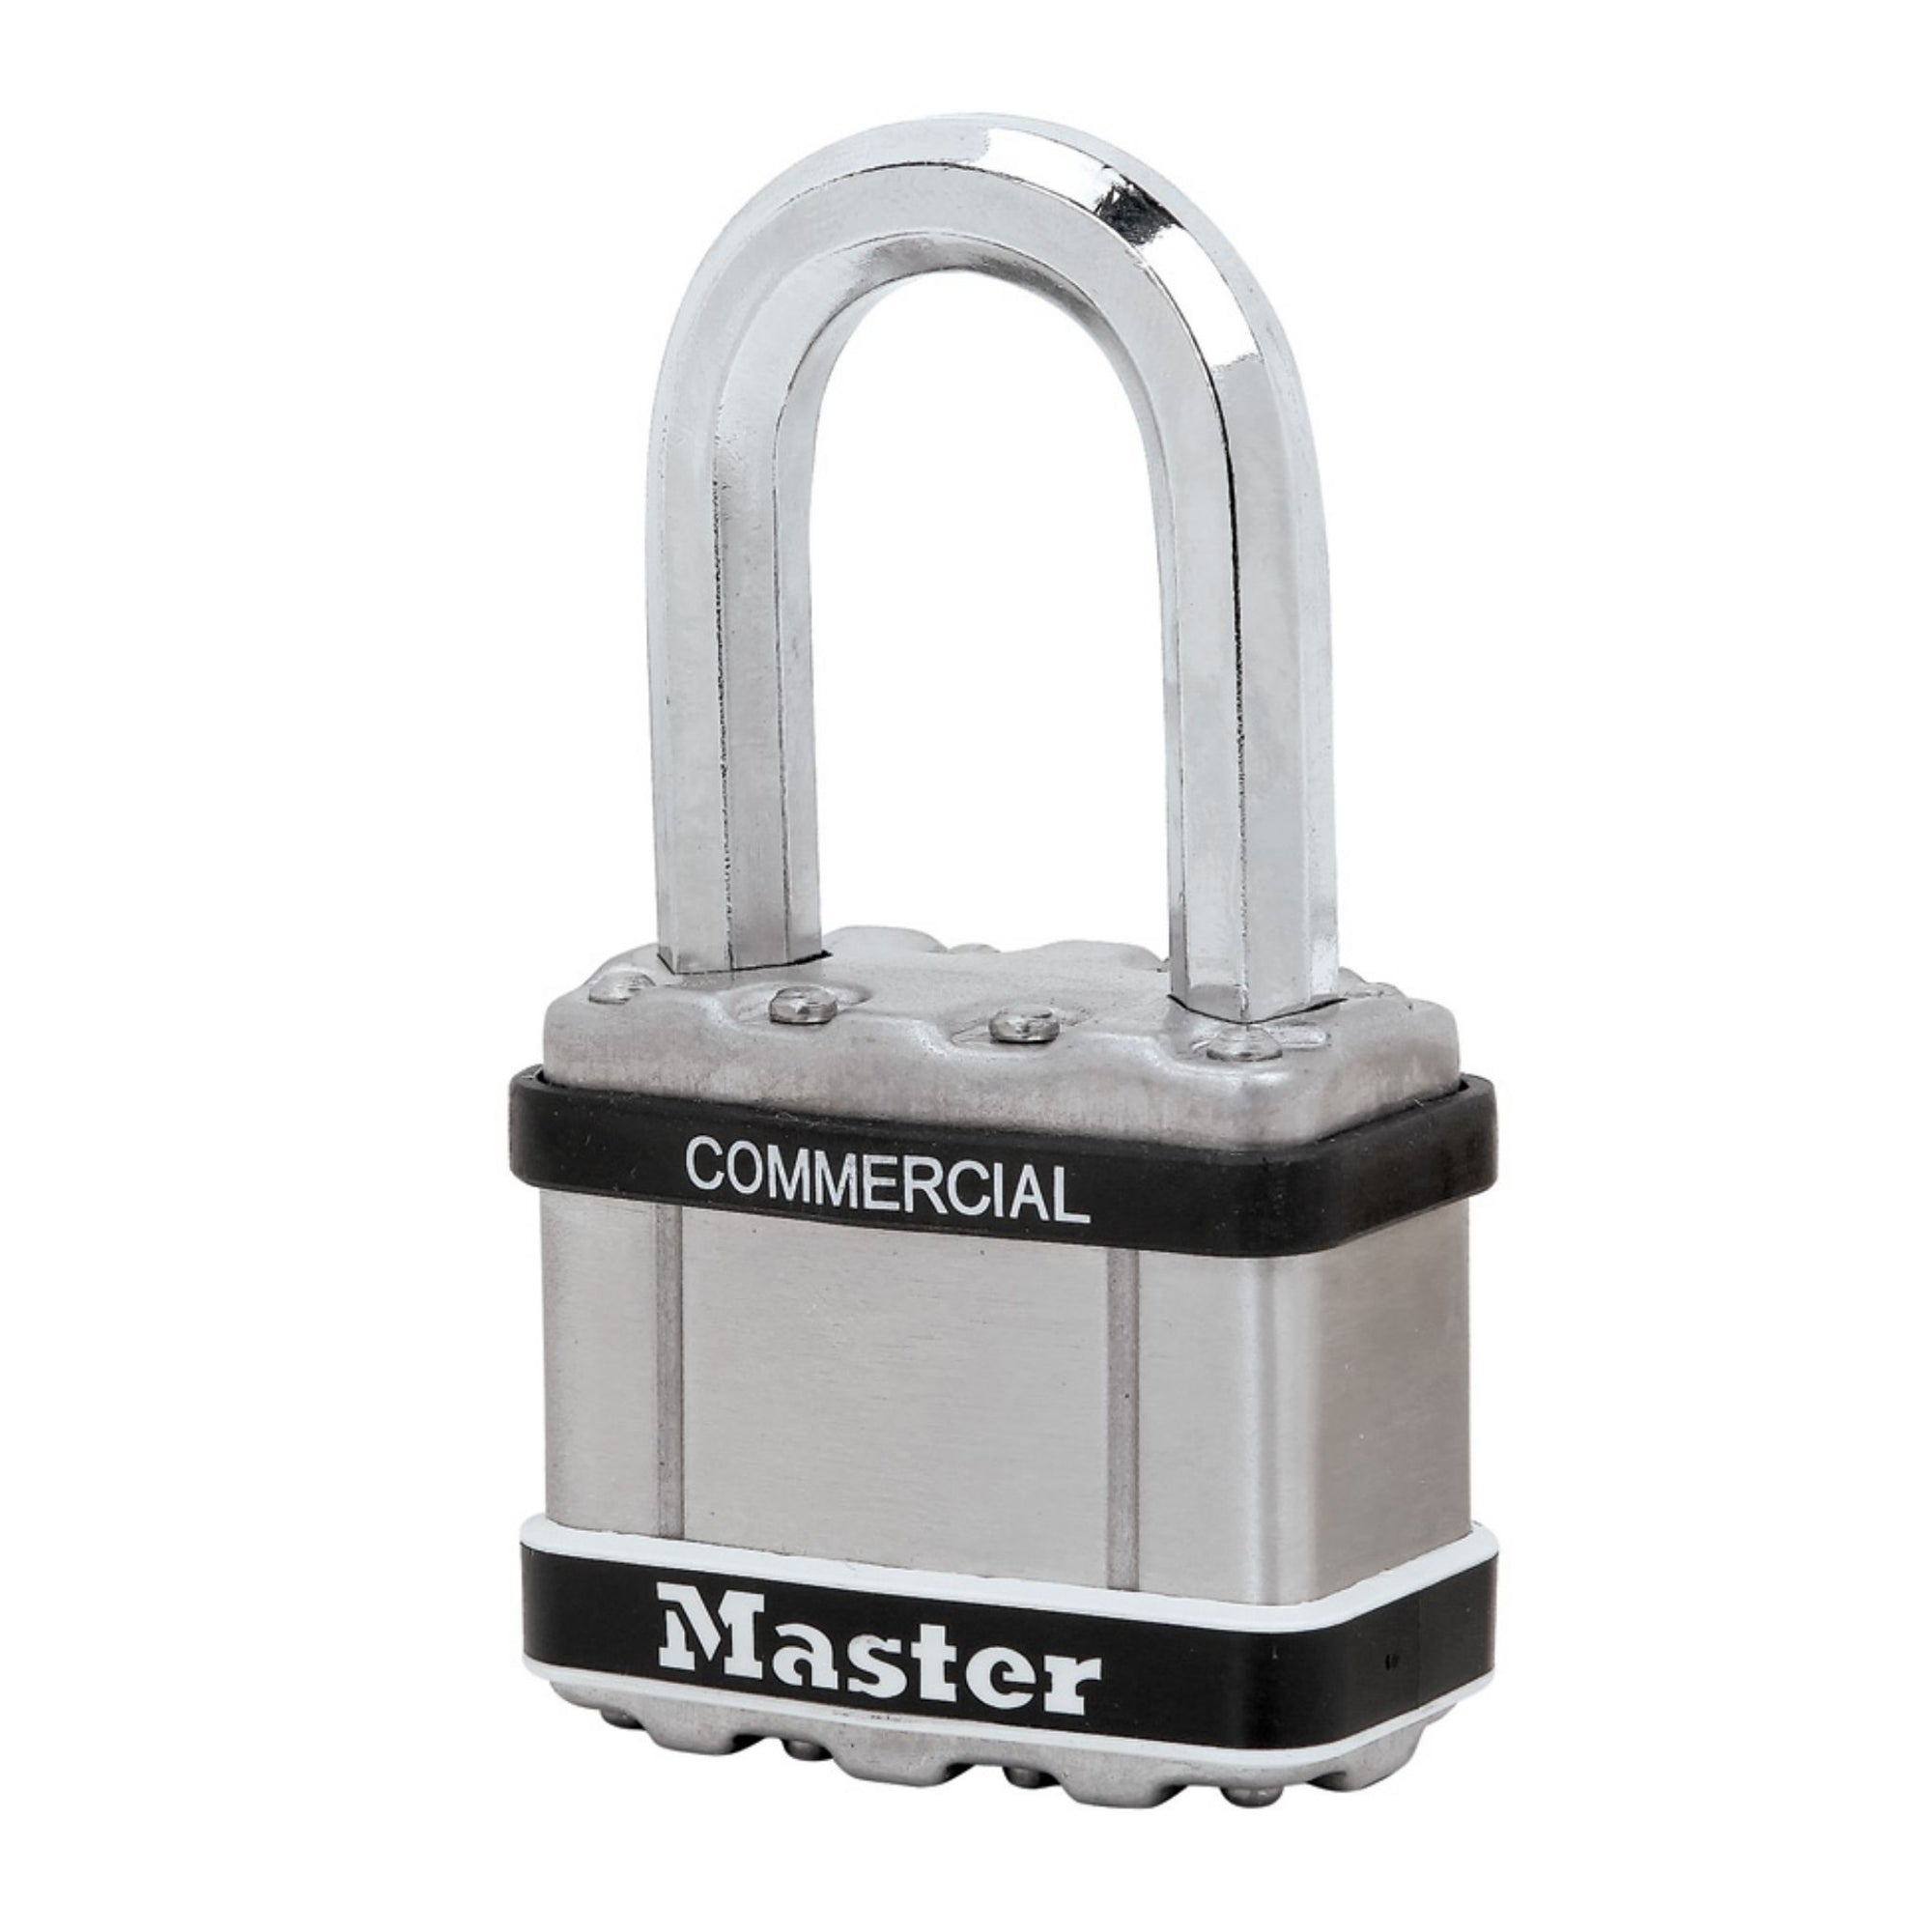 Master Lock M5 STS LF Commercial Magnum Padlock with 1-1/2" Shackle - The Lock Source